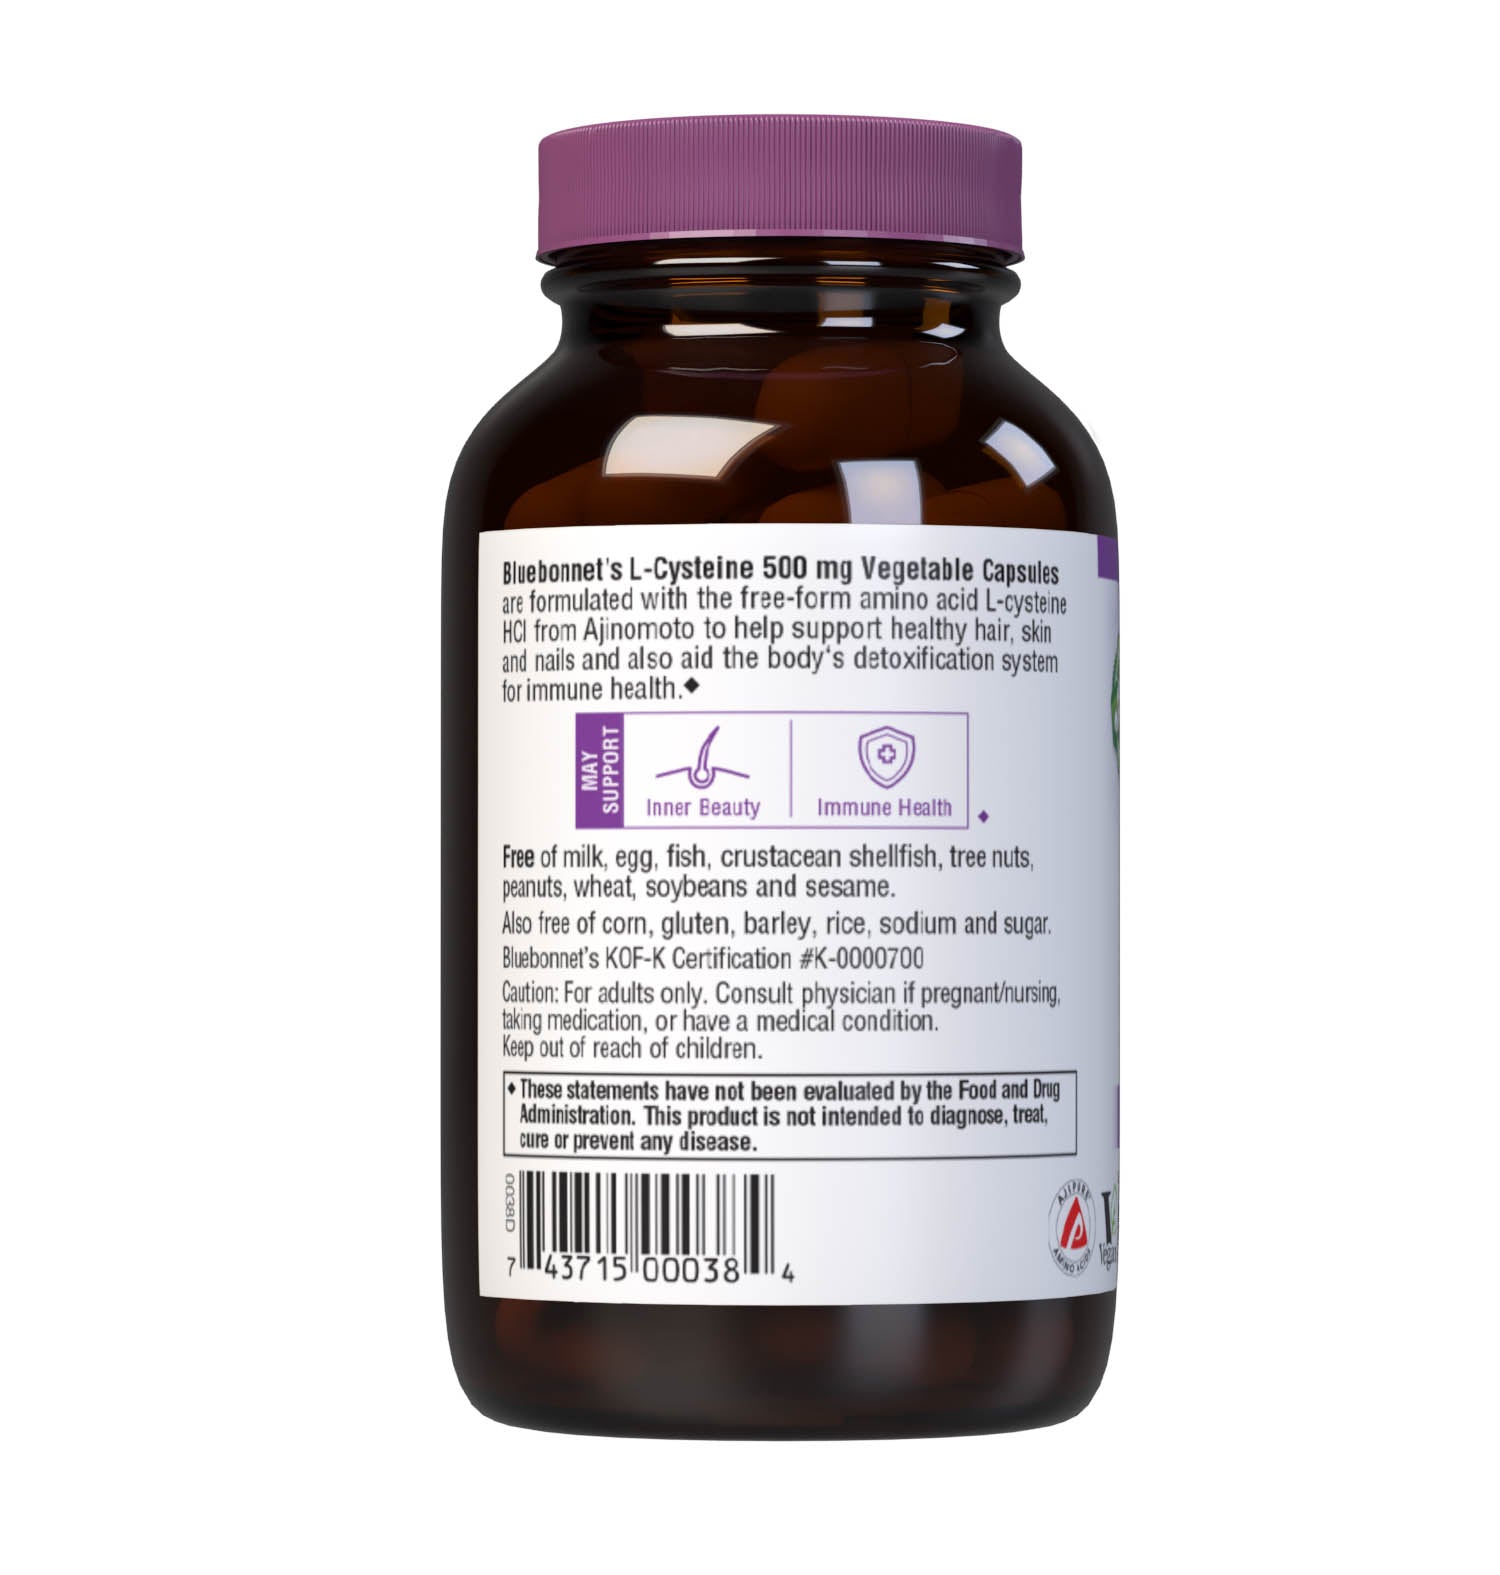 Bluebonnet’s L-Cysteine 500 mg 60 Vegetable Capsules are formulated with the free-form amino acid L-cysteine HCI in its crystalline form from Ajinomoto to support healthy hair, skin and nails. Description panel. #size_60 count